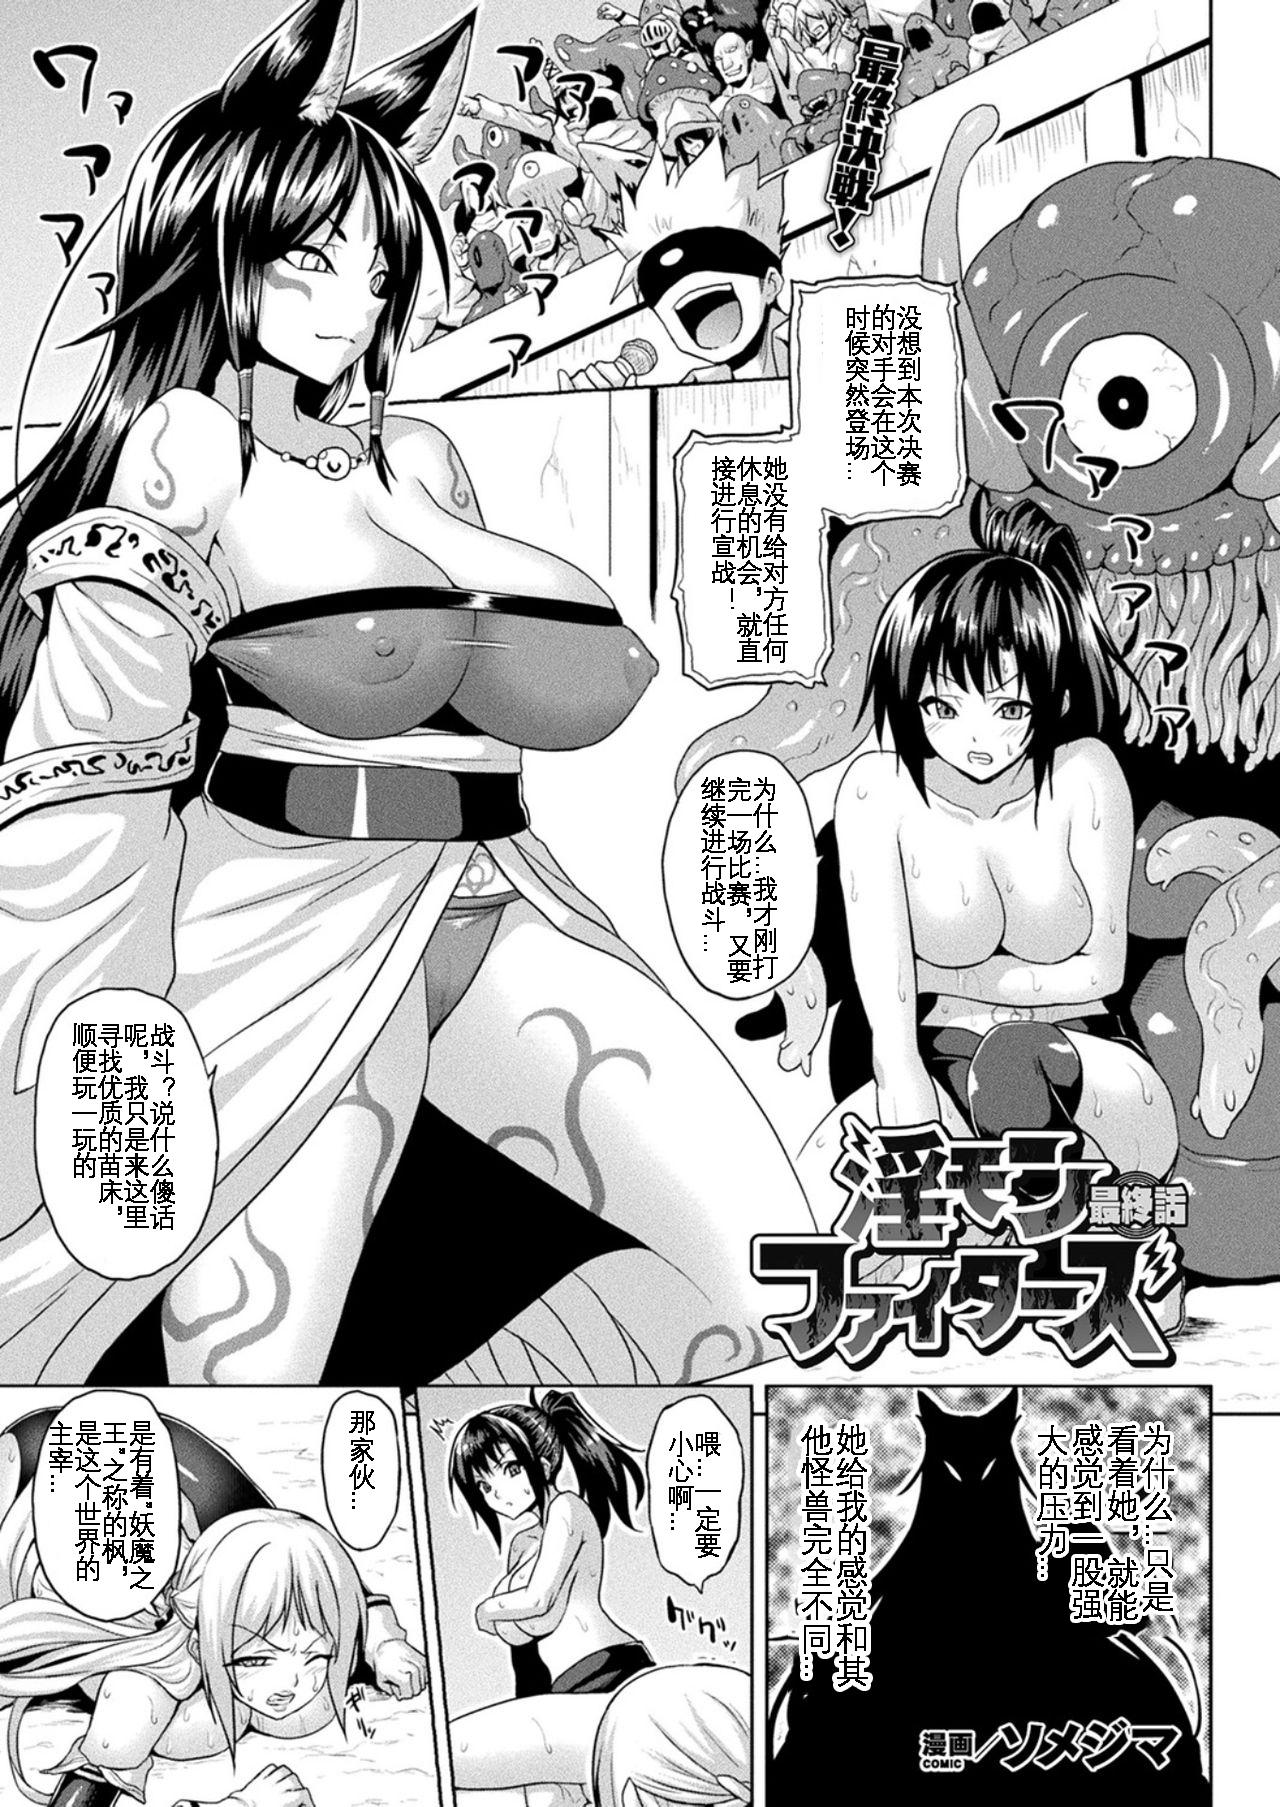 Inmon Fighters Ch. 1 41